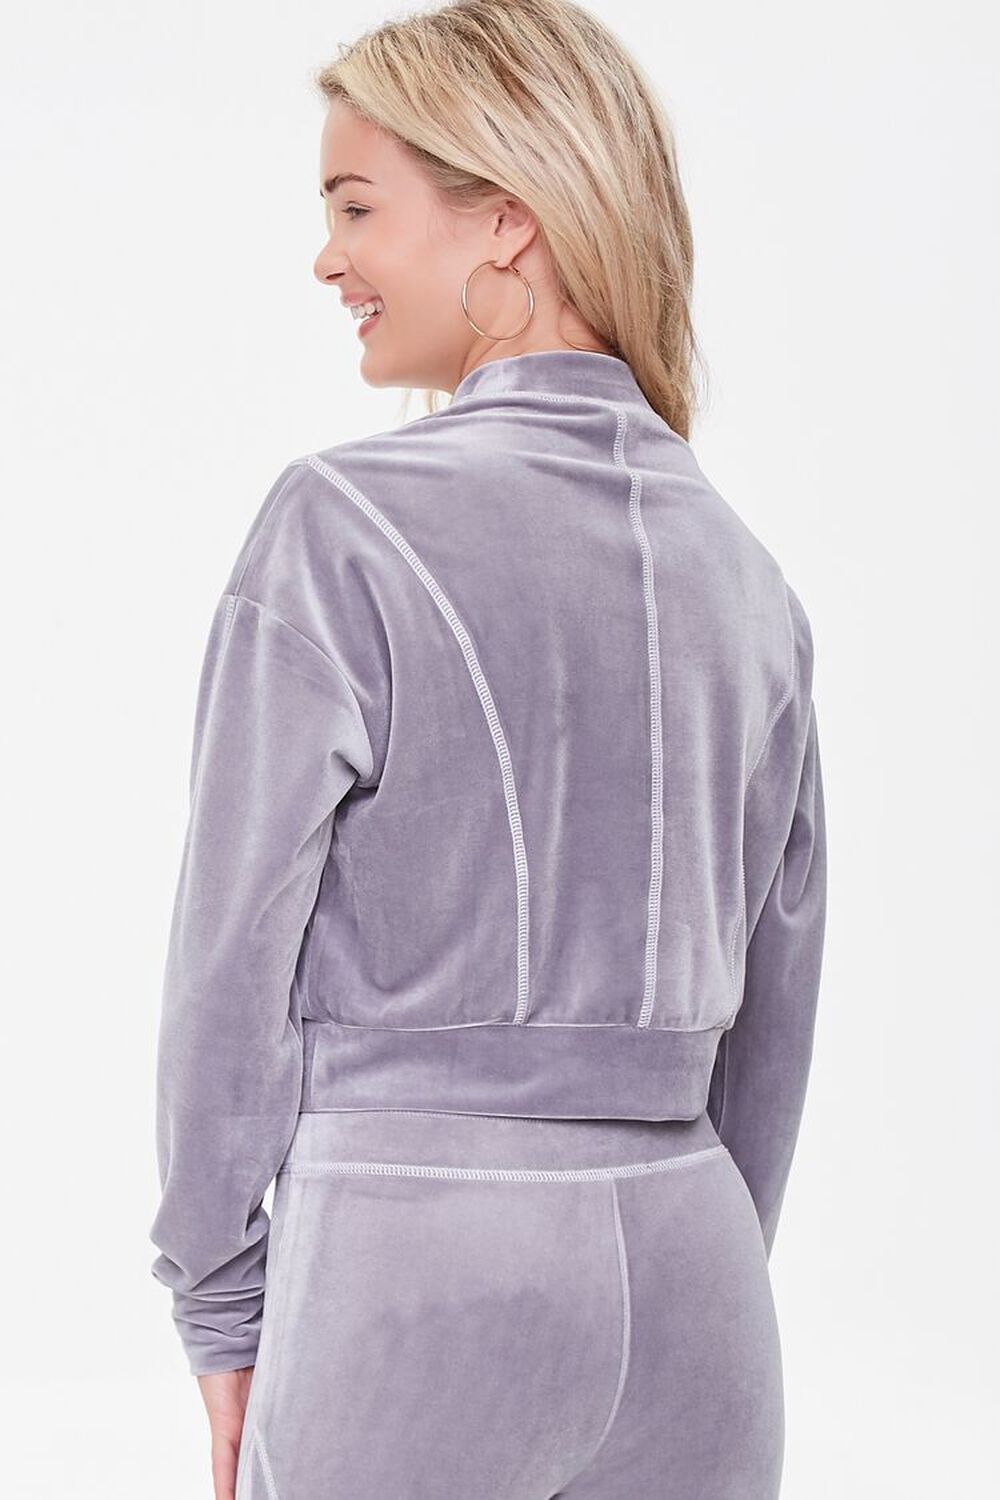 GREY Embroidered Mont Blanc Pullover, image 3